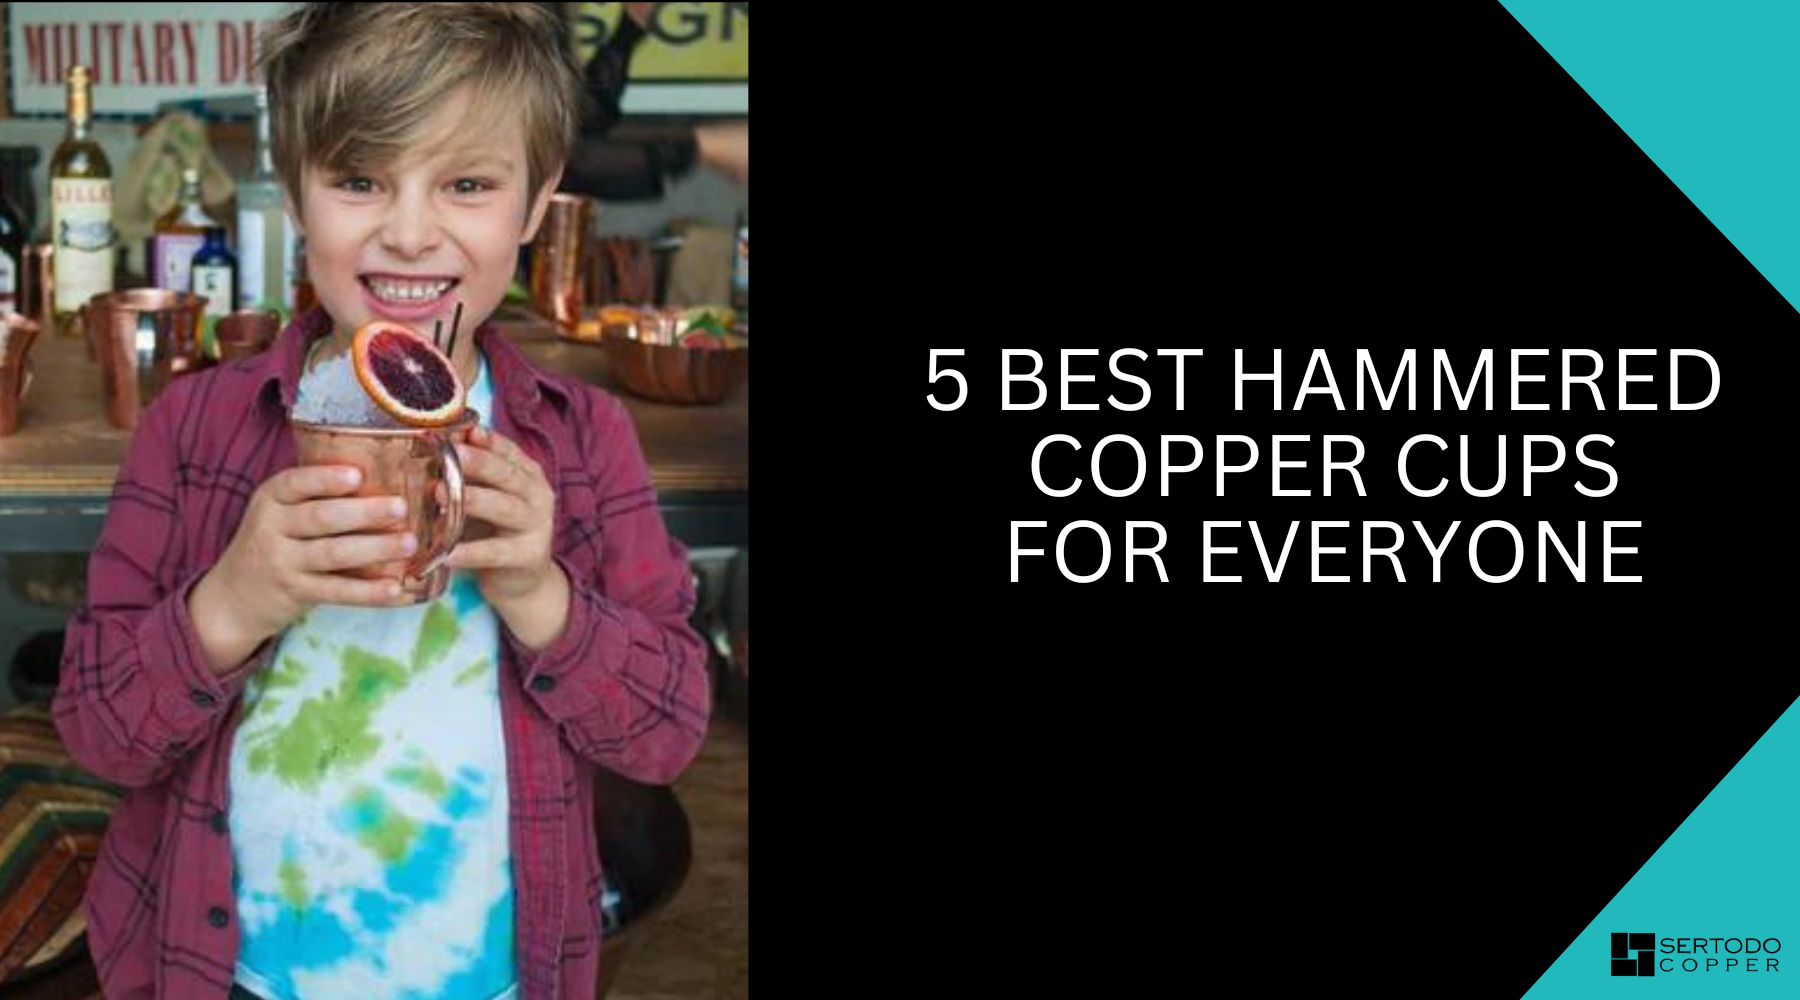 5 Best Hammered Copper Cups For Everyone